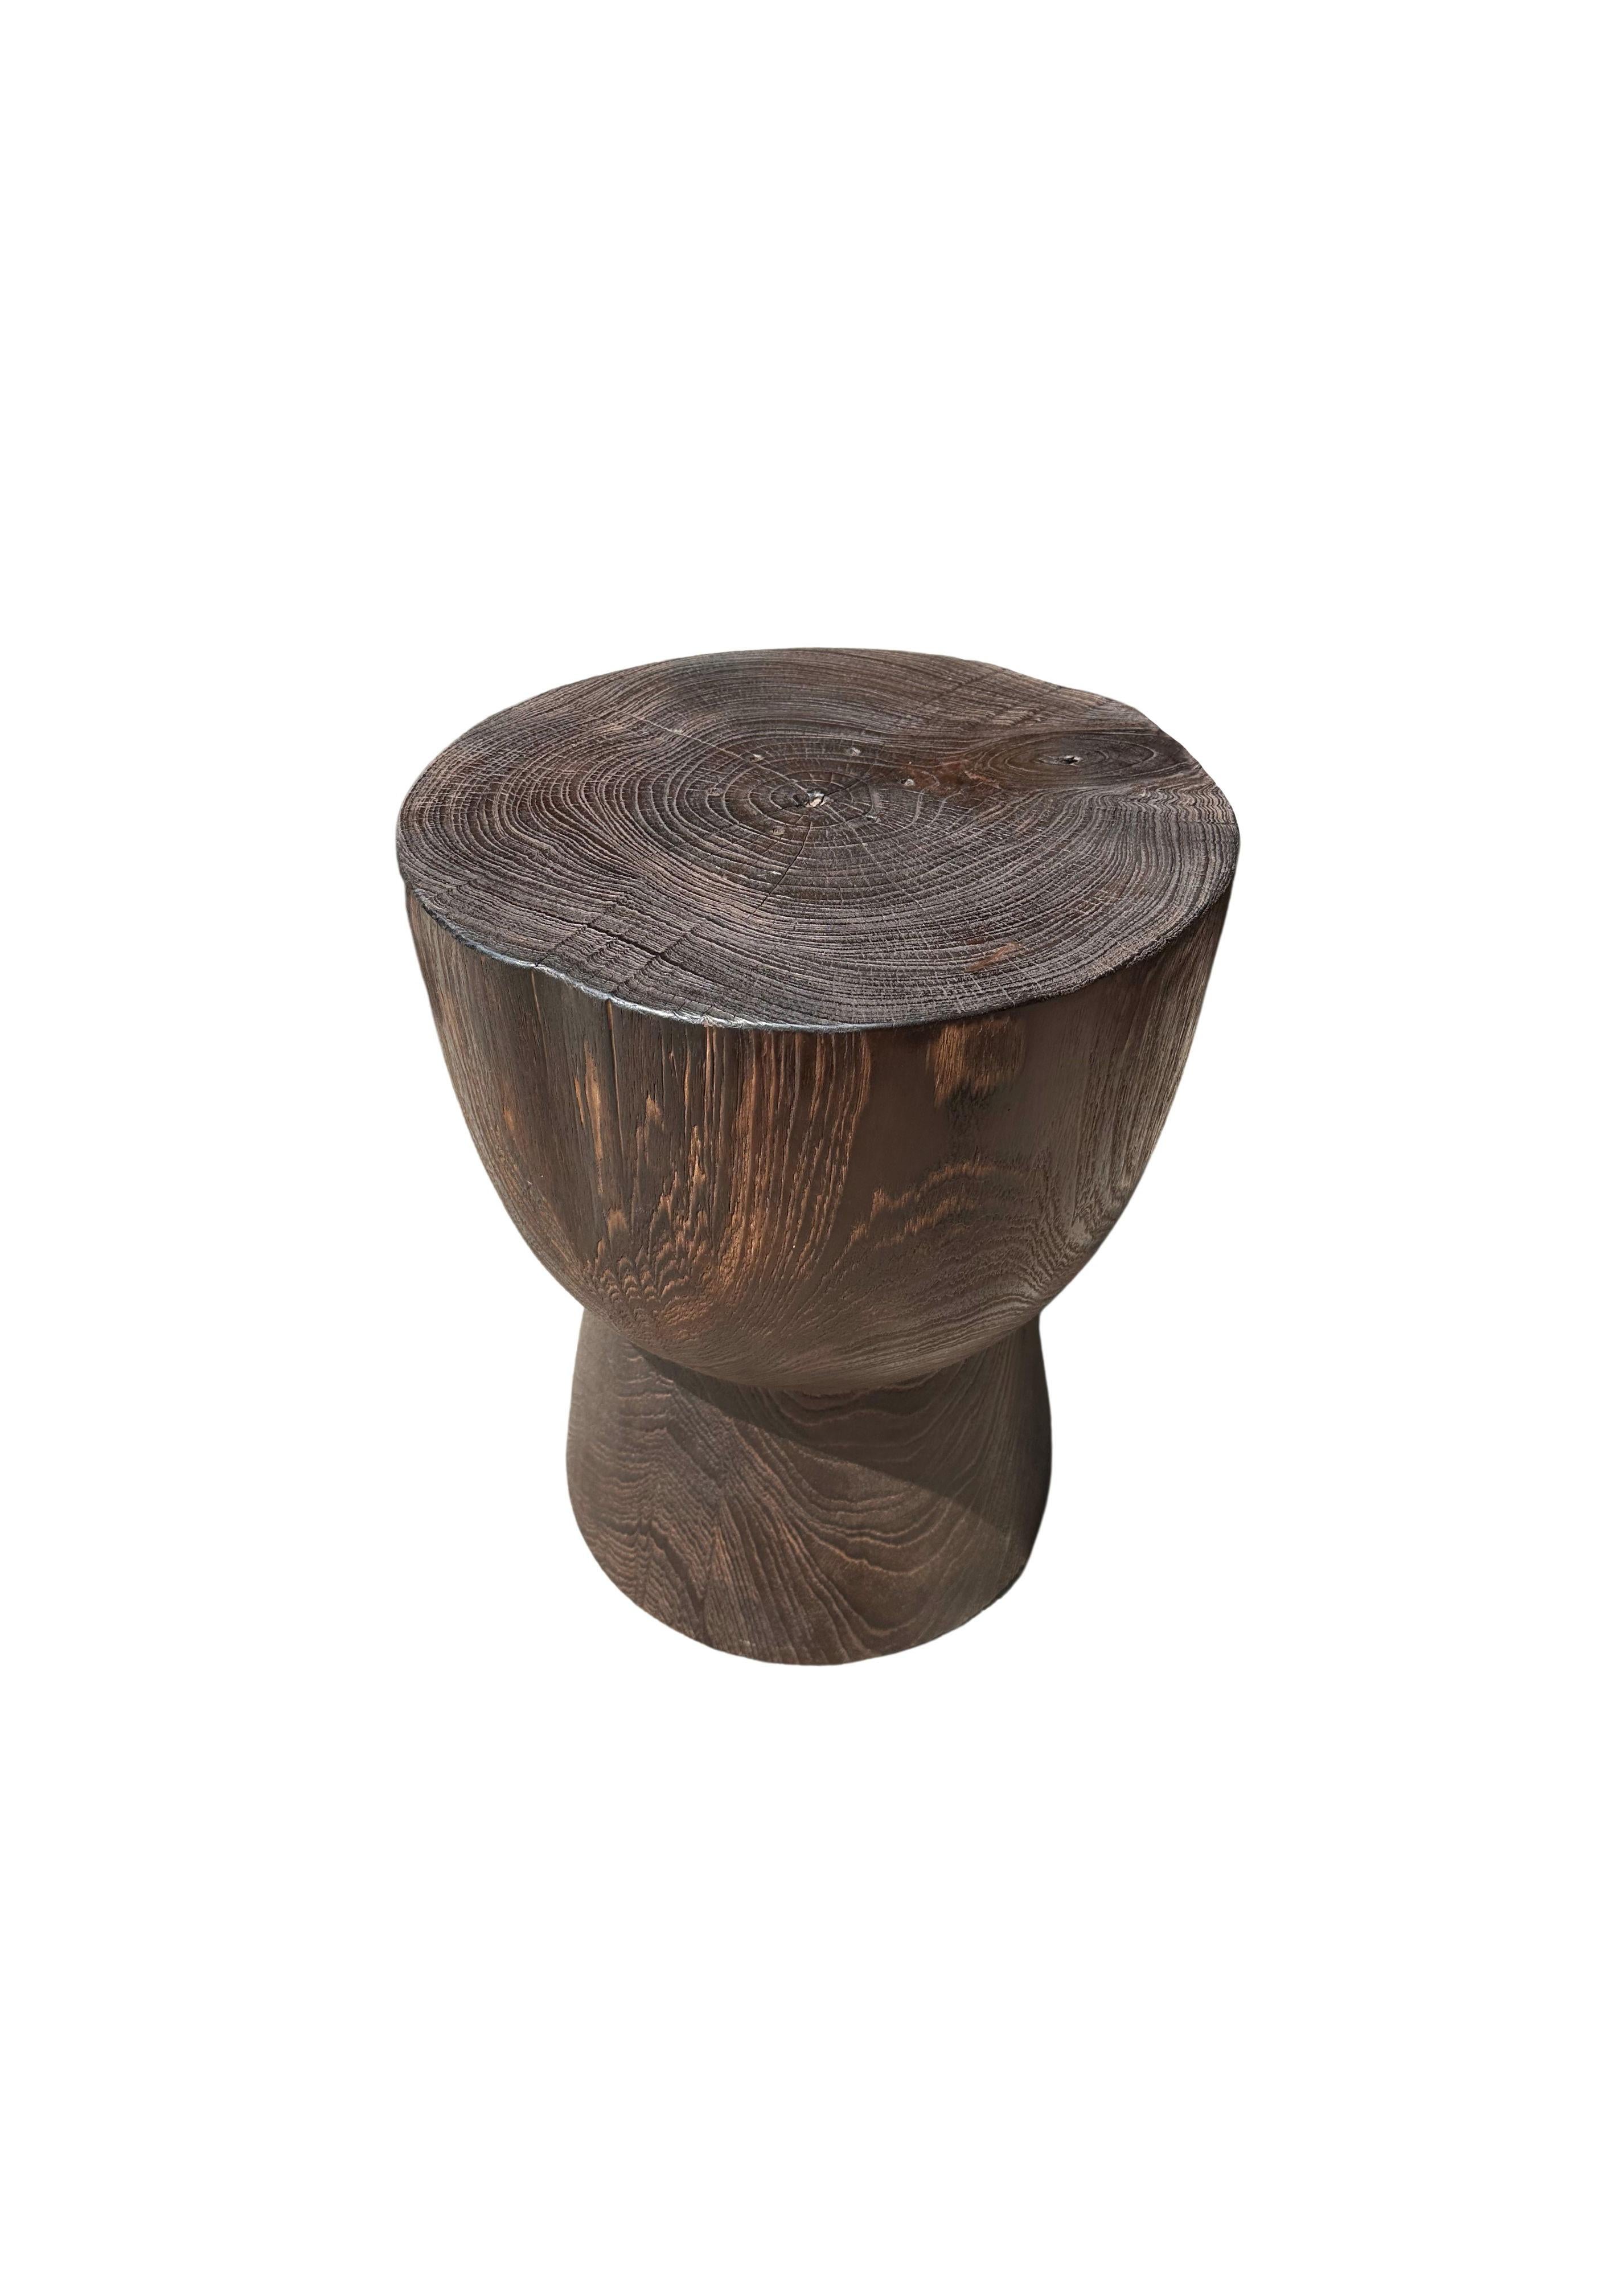 A wonderfully sculptural round side table featuring a natural finish. Its neutral pigment and subtle wood texture makes it perfect for any space. A uniquely sculptural and versatile piece certain to invoke conversation. This table was crafted from